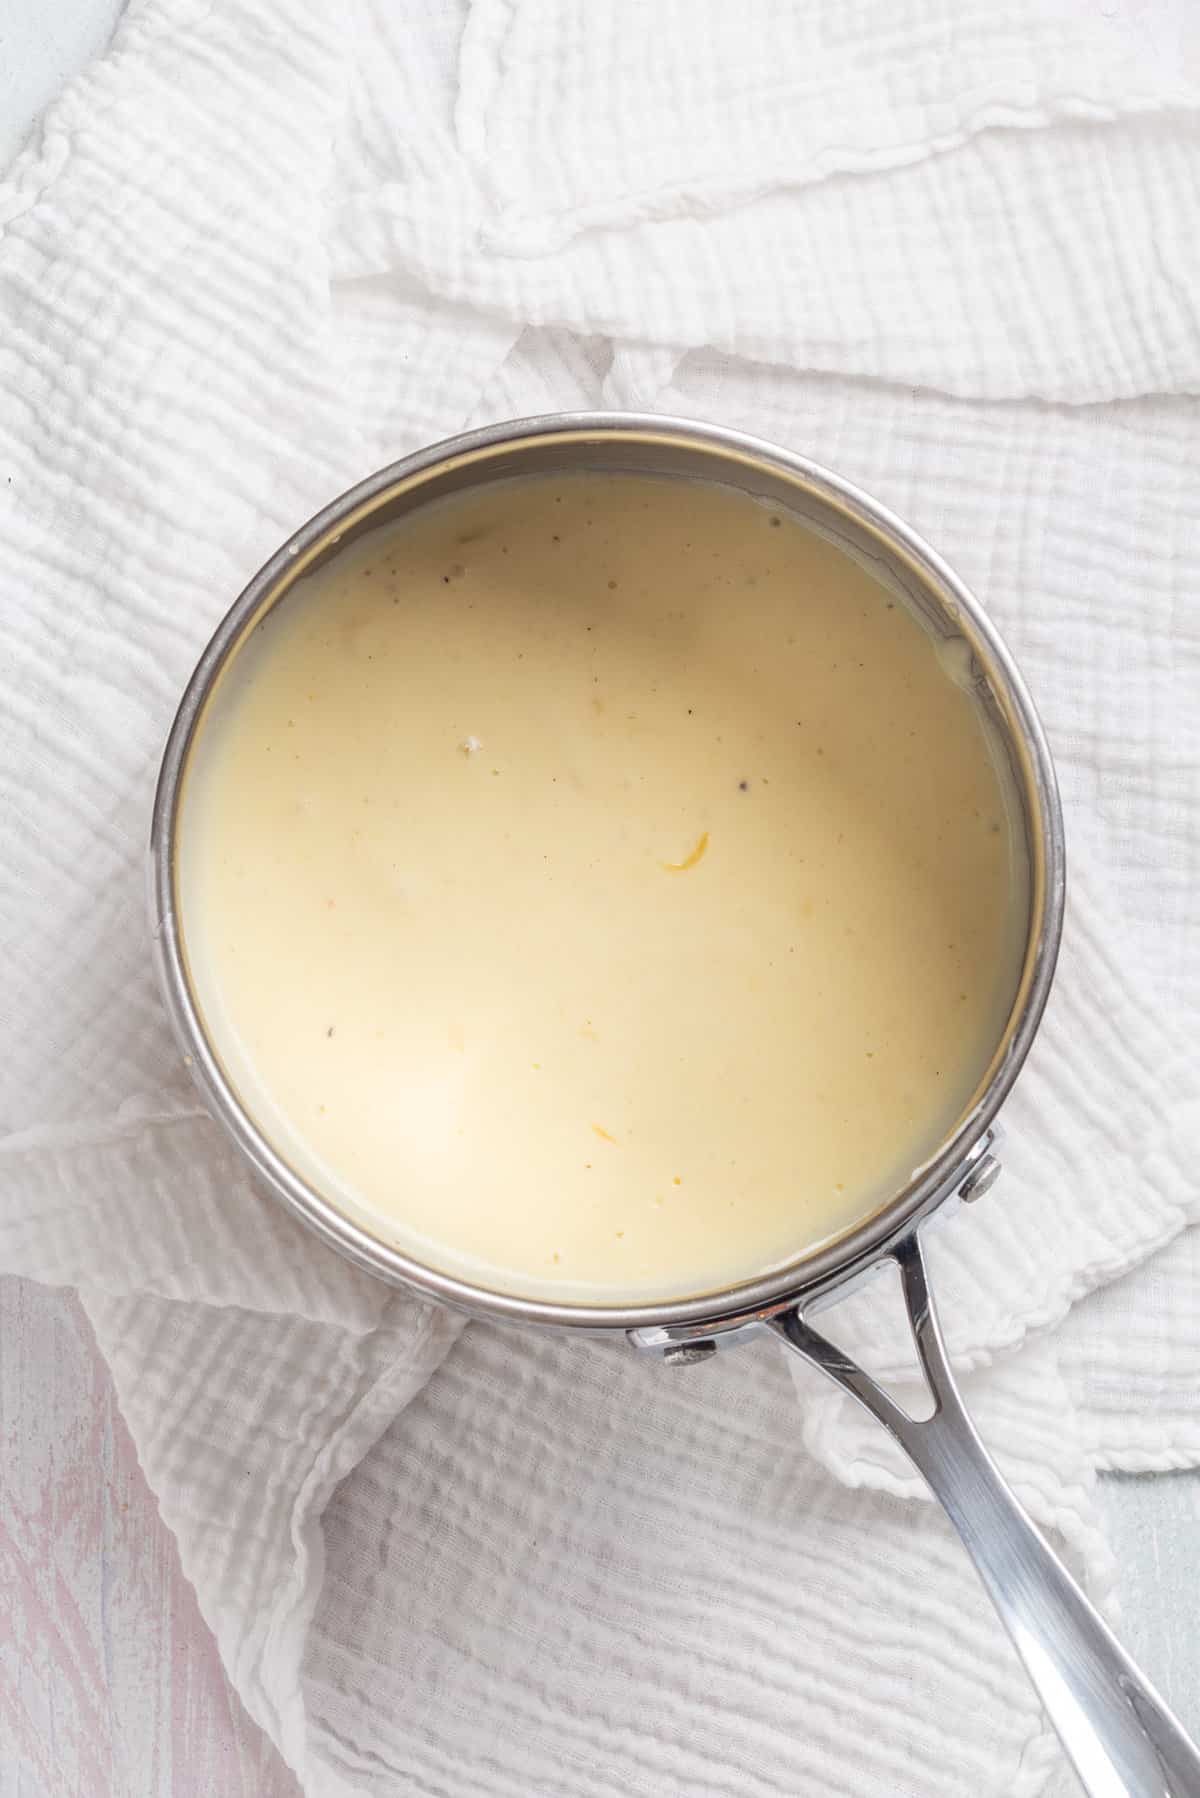 An overhead image of the cooked mornay sauce.